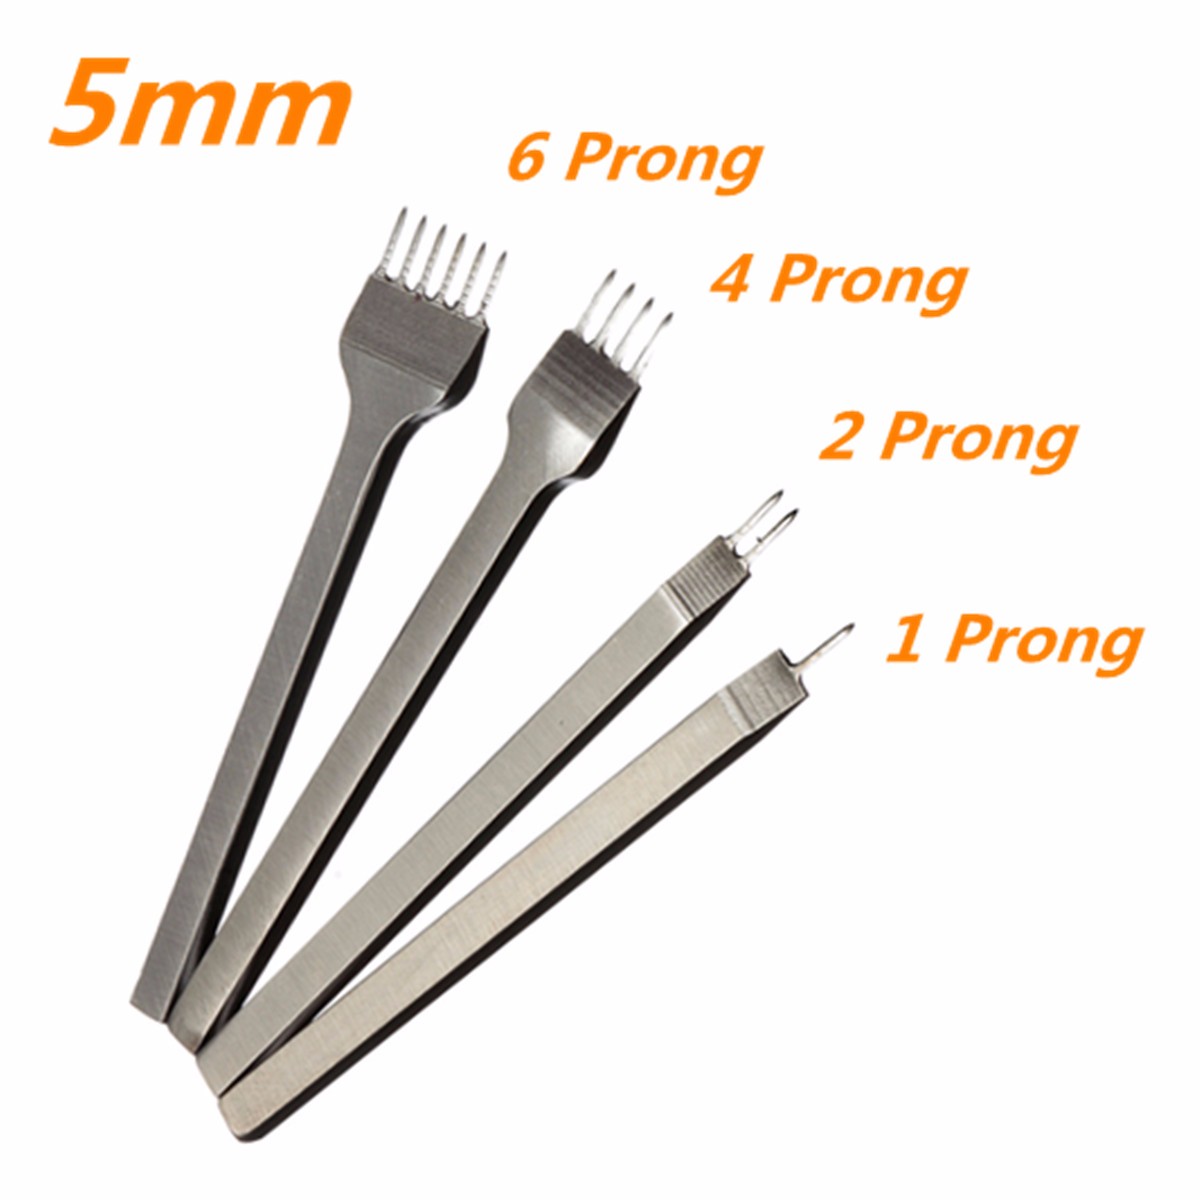 5mm-Leather-Craft-Leather-Craft-Hole-Stitching-Punch-Tools-1246-1-set-Prong-1041728-4